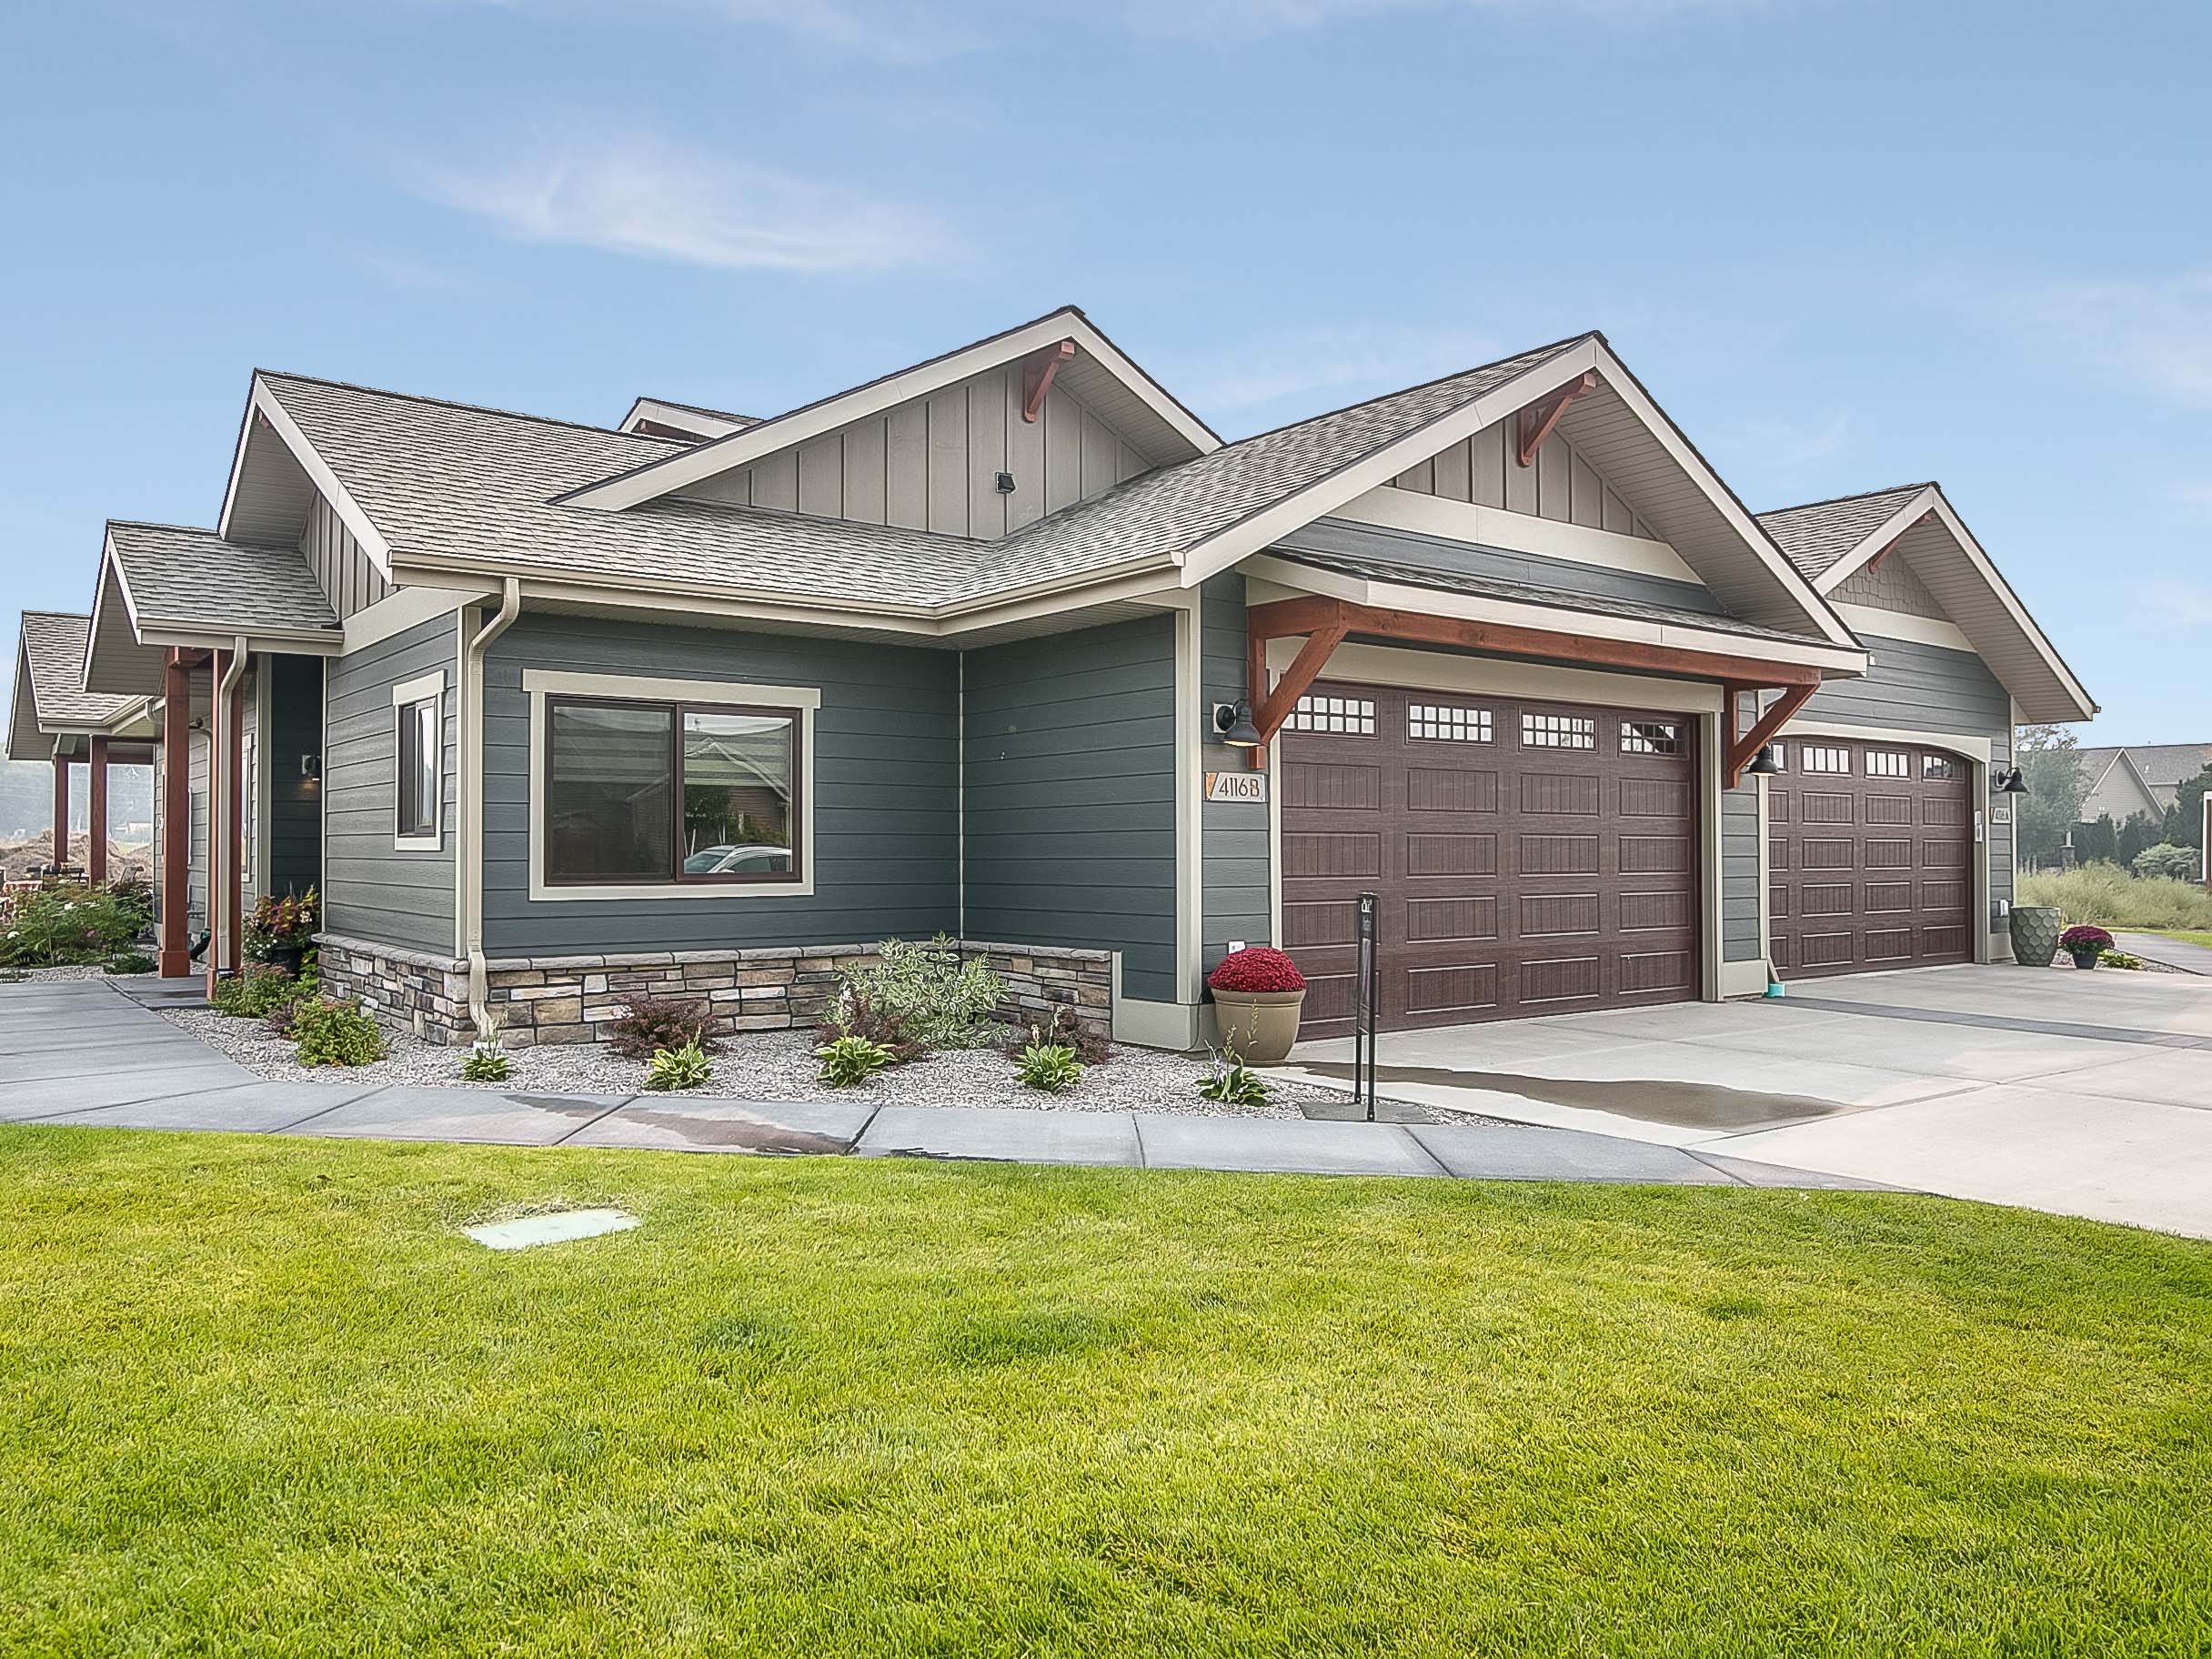 Find new construction or search for New Homes With 4 Plus Garage Spaces in Colorado